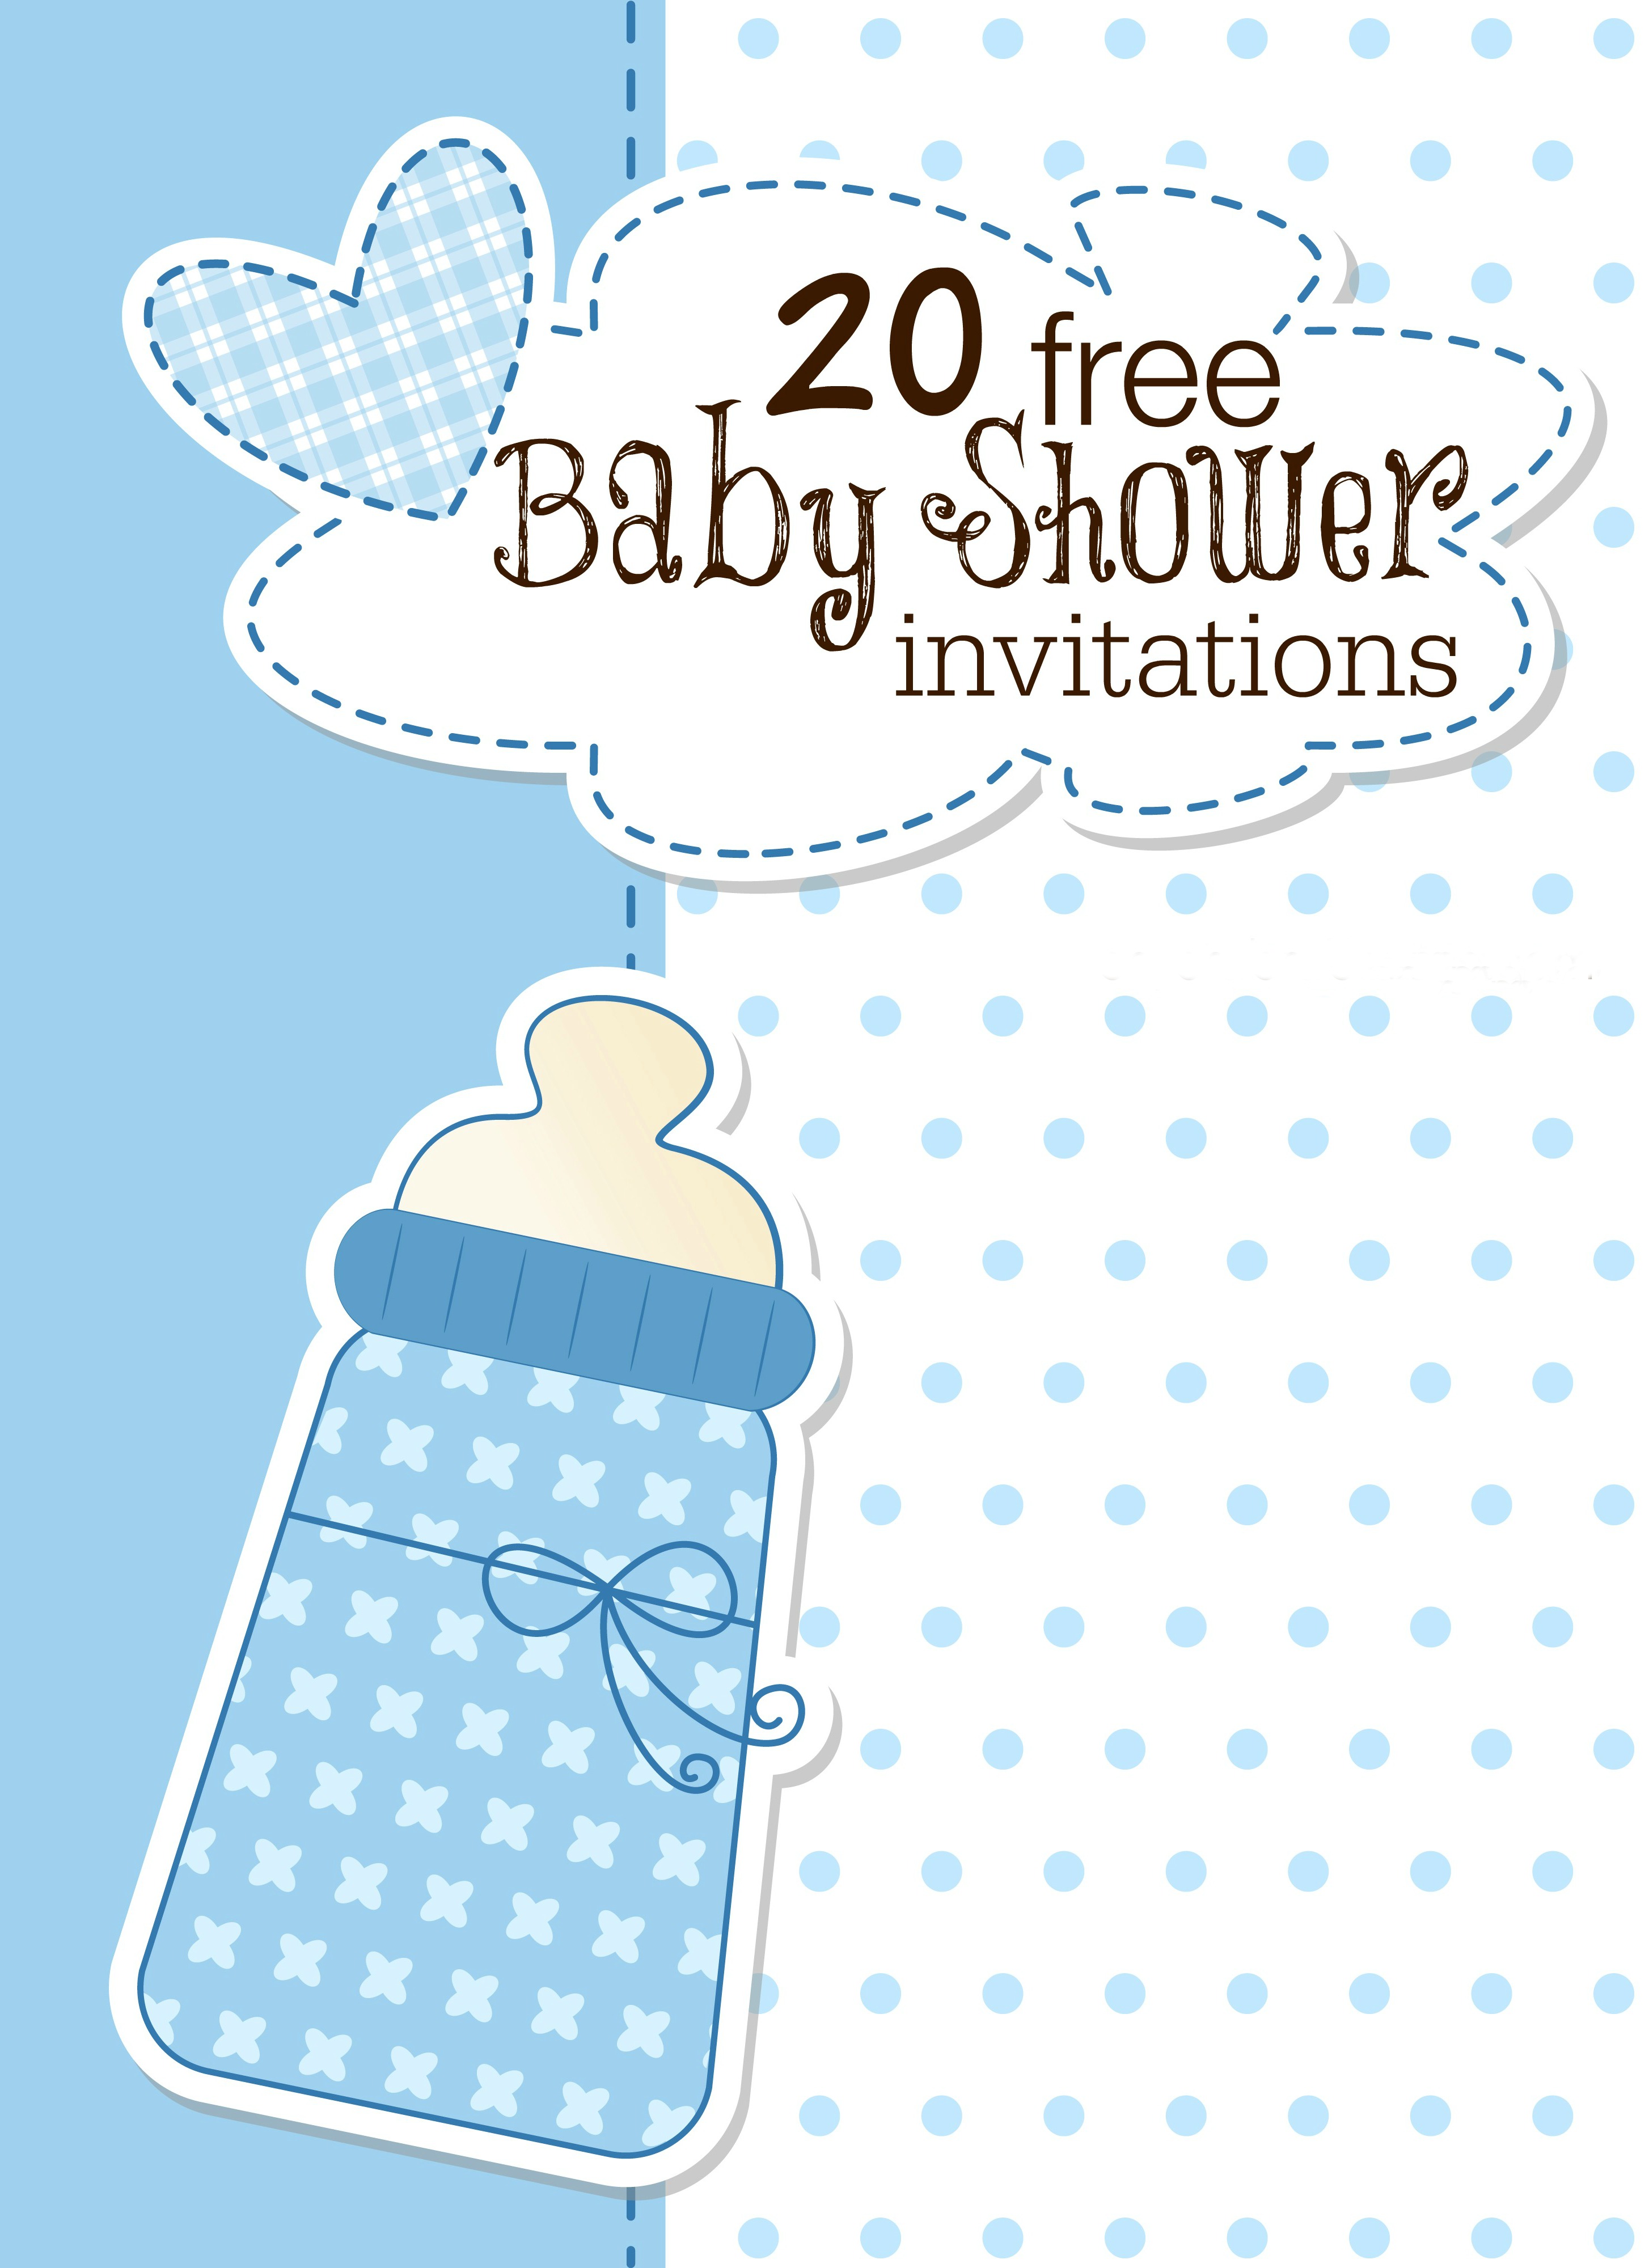 Full Size of Baby Shower:nursery Themes For Girls Baby Girl Party Plates Girl Baby Shower Decorations Baby Shower Decorations For Girls Nautical Baby Shower Invitations For Boys Baby Girl Themes For Bedroom Baby Shower Ideas Baby Shower Decorations Themes For Baby Girl Nursery